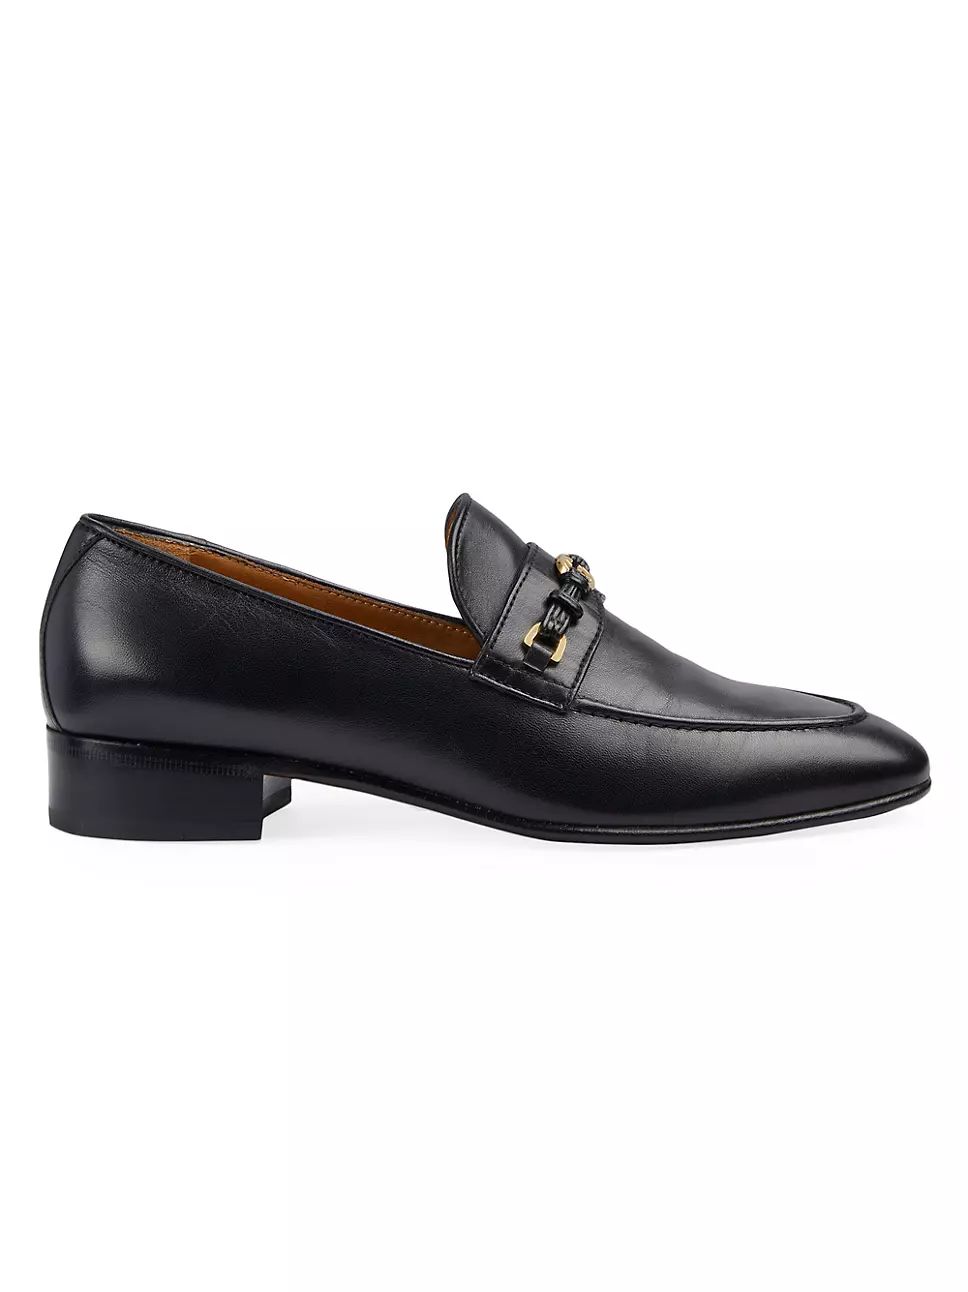 Ed GG Leather Loafers | Saks Fifth Avenue